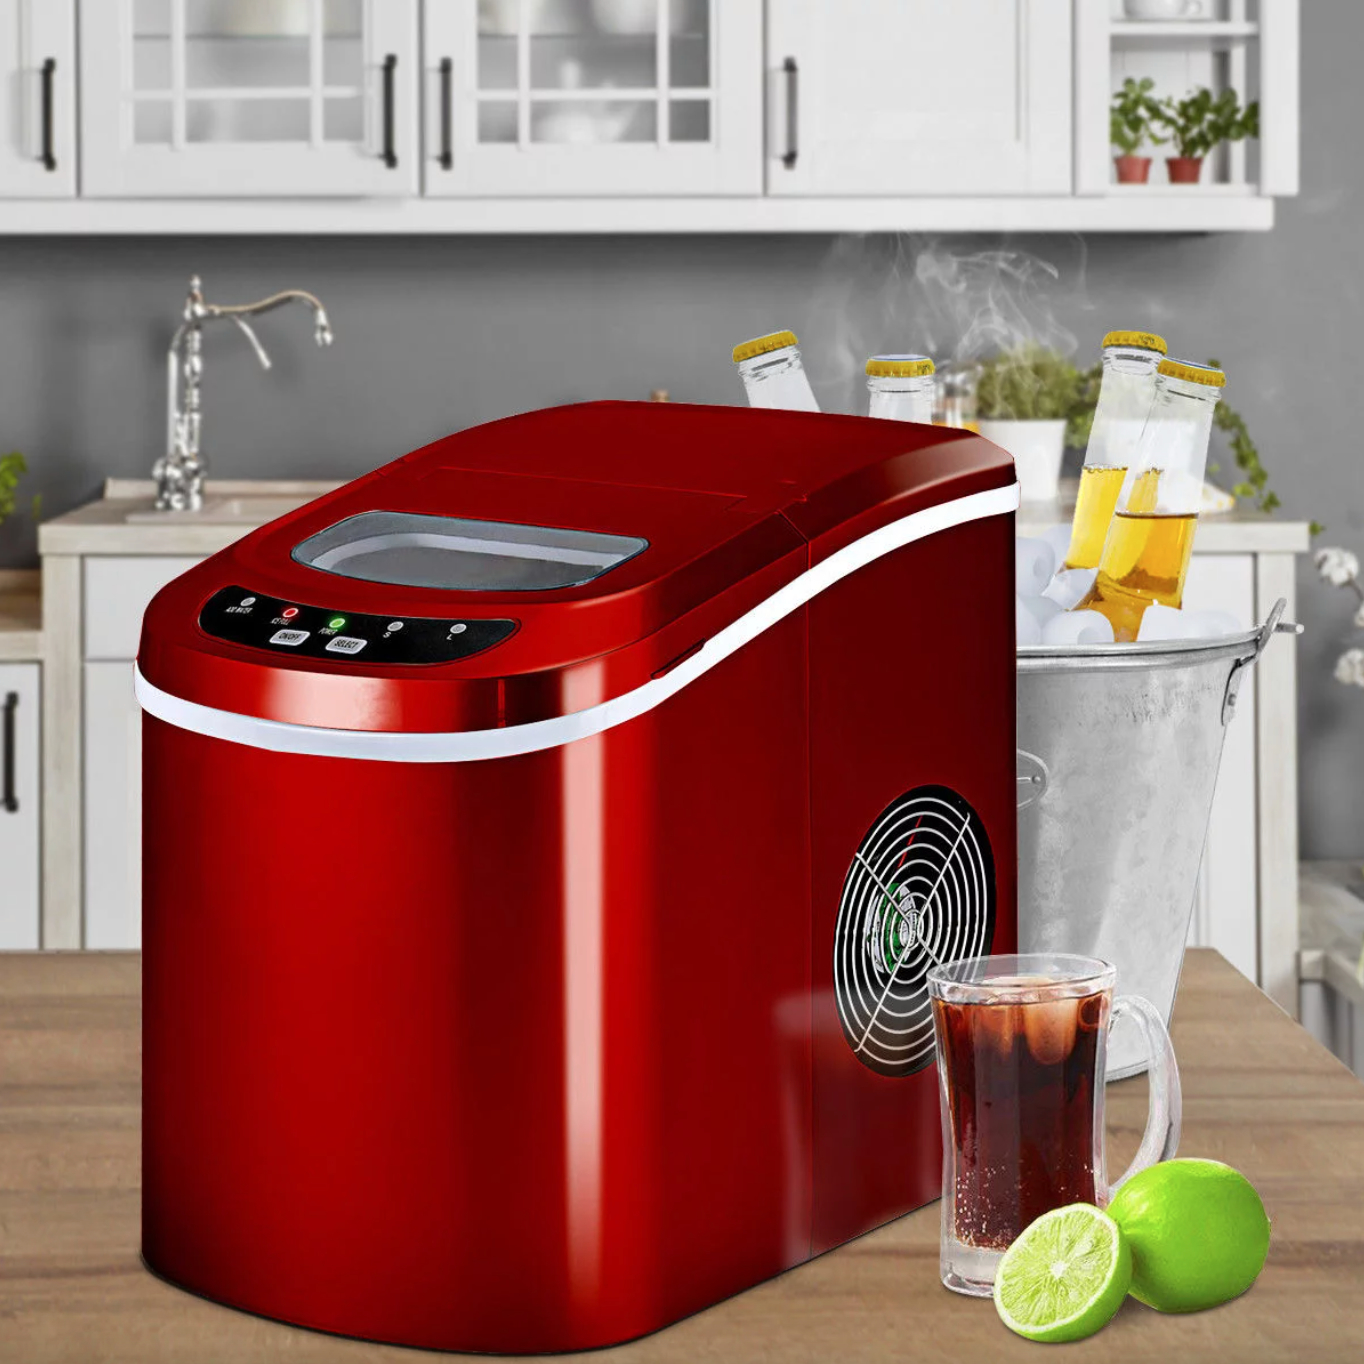 the red ice maker on the counter with beverages in a decorated kitchen space